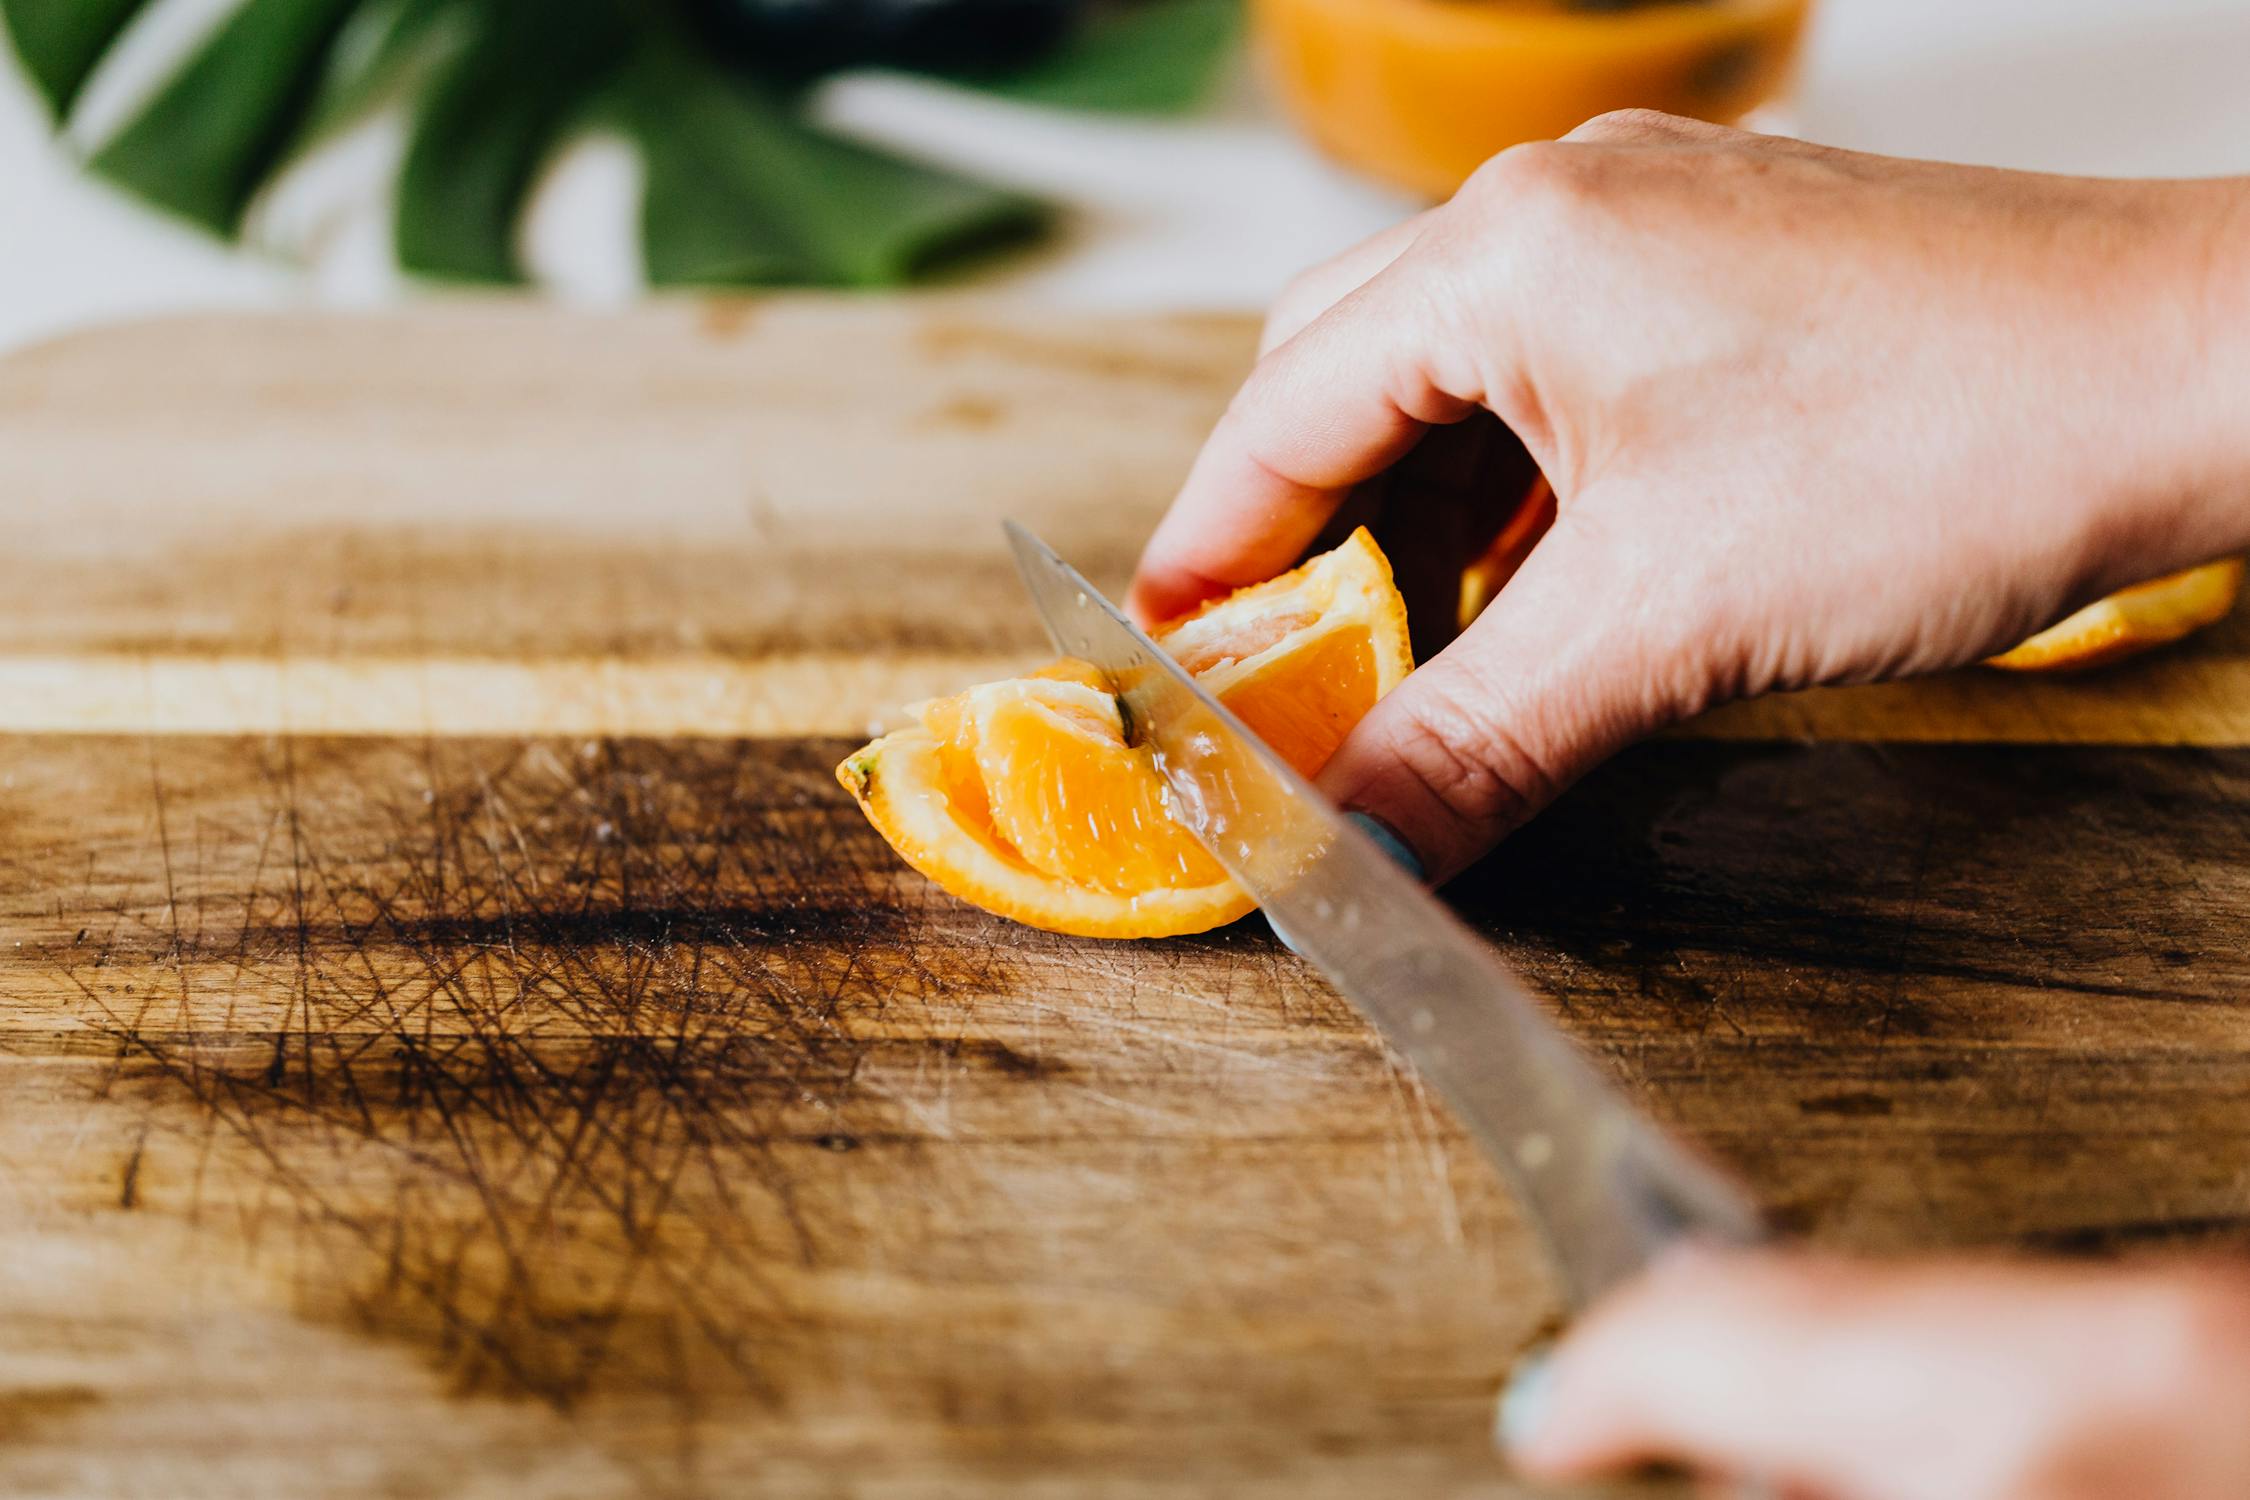 Person Holding Stainless Steel Knife and Sliced Orange Fruit · Free ...